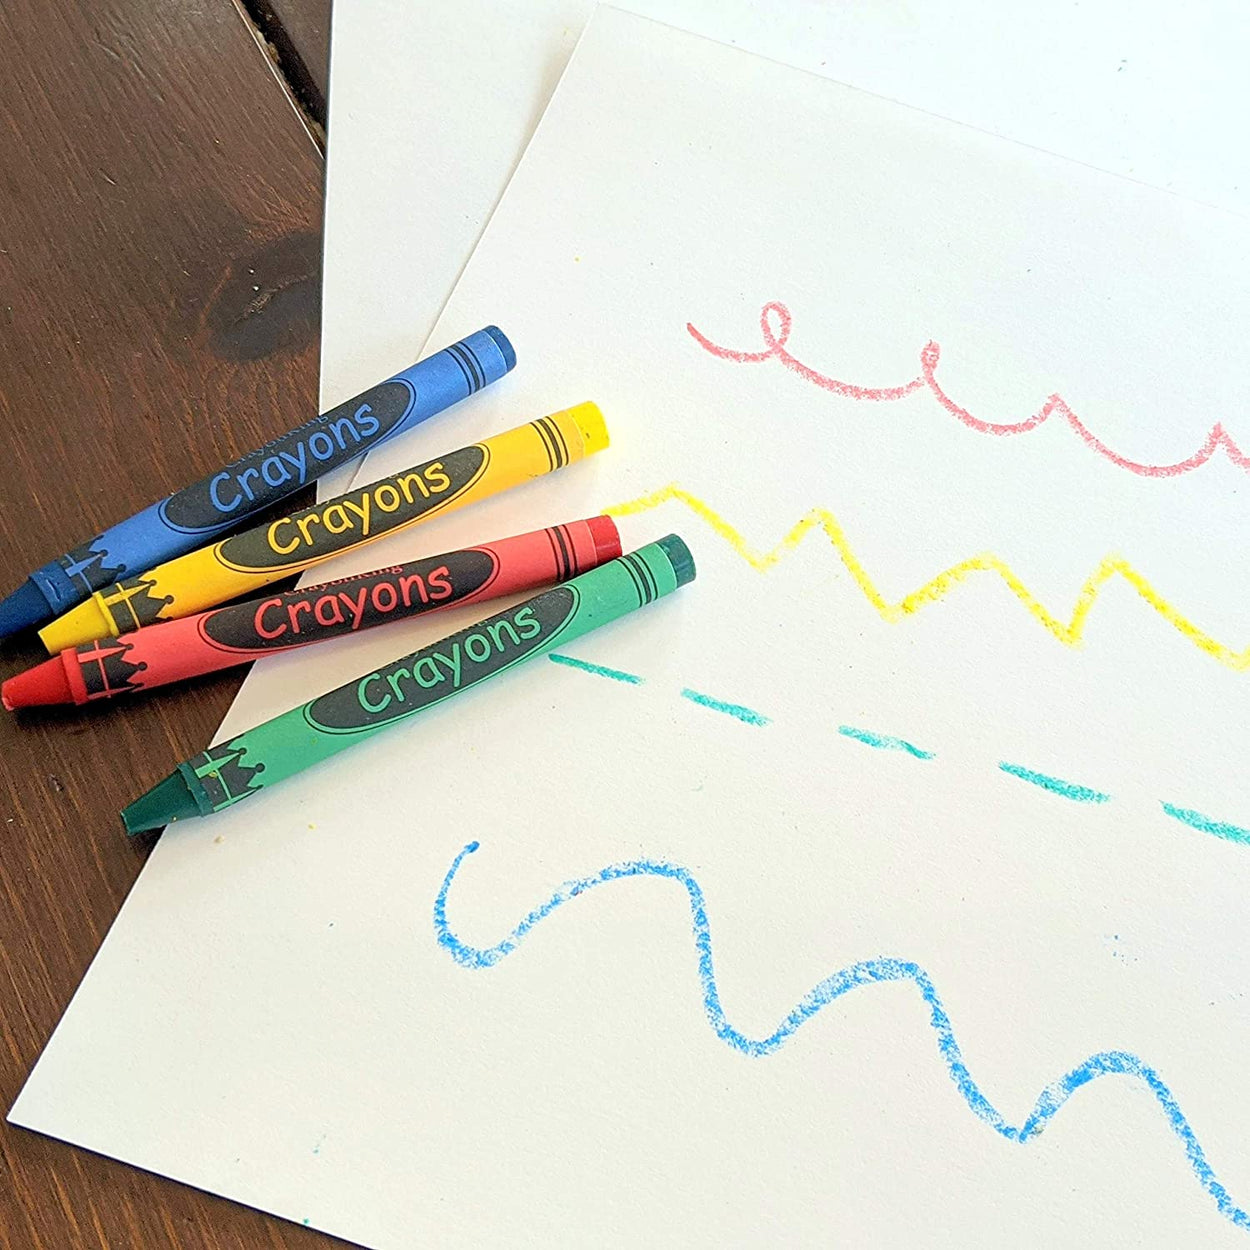 Wholesale unbreakable crayons For Drawing, Writing and Others